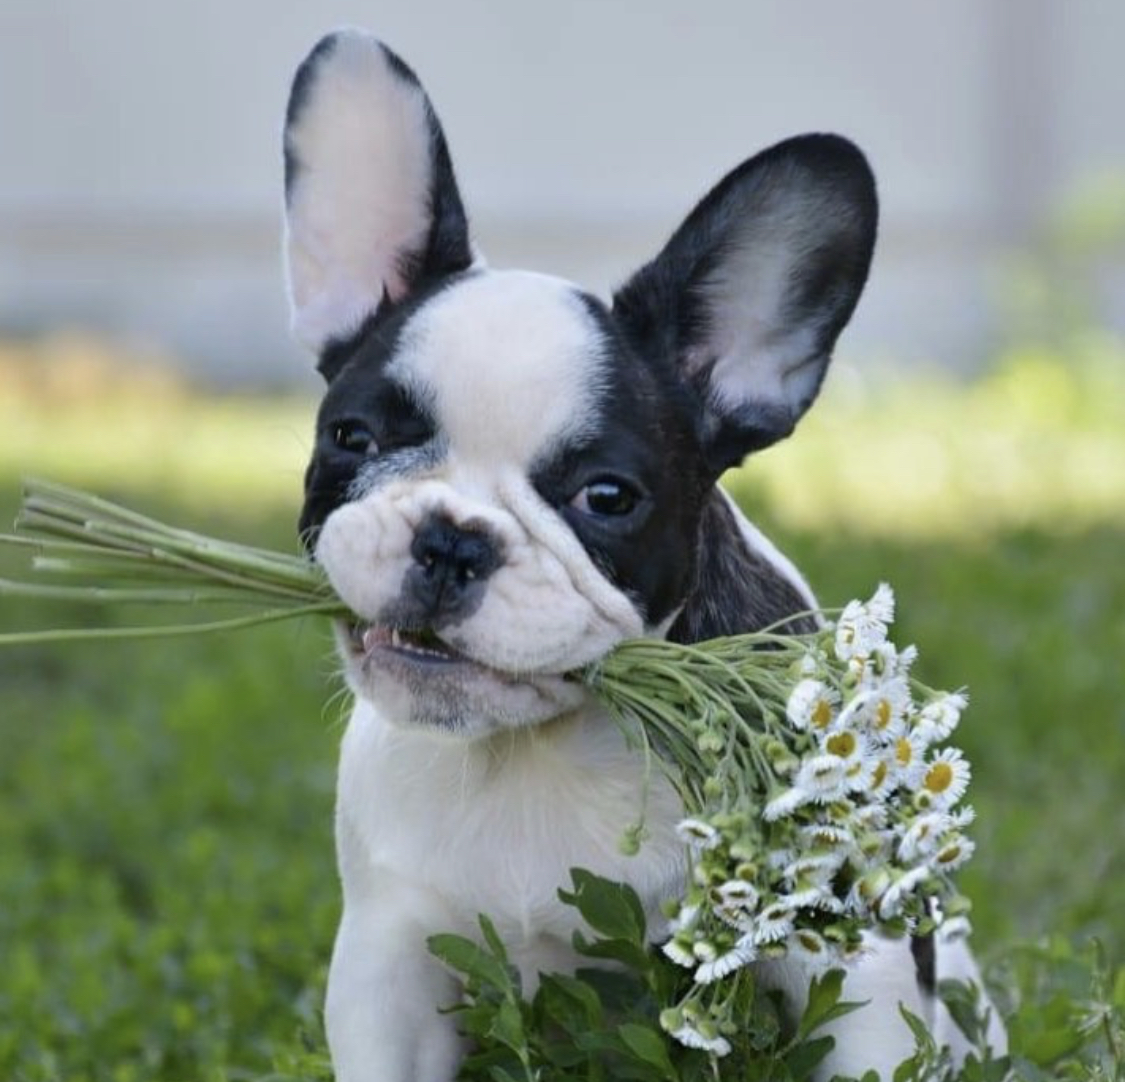  French Bulldog puppy with a bunch of harvested chamomile flowers in its mouth while standing in the yard